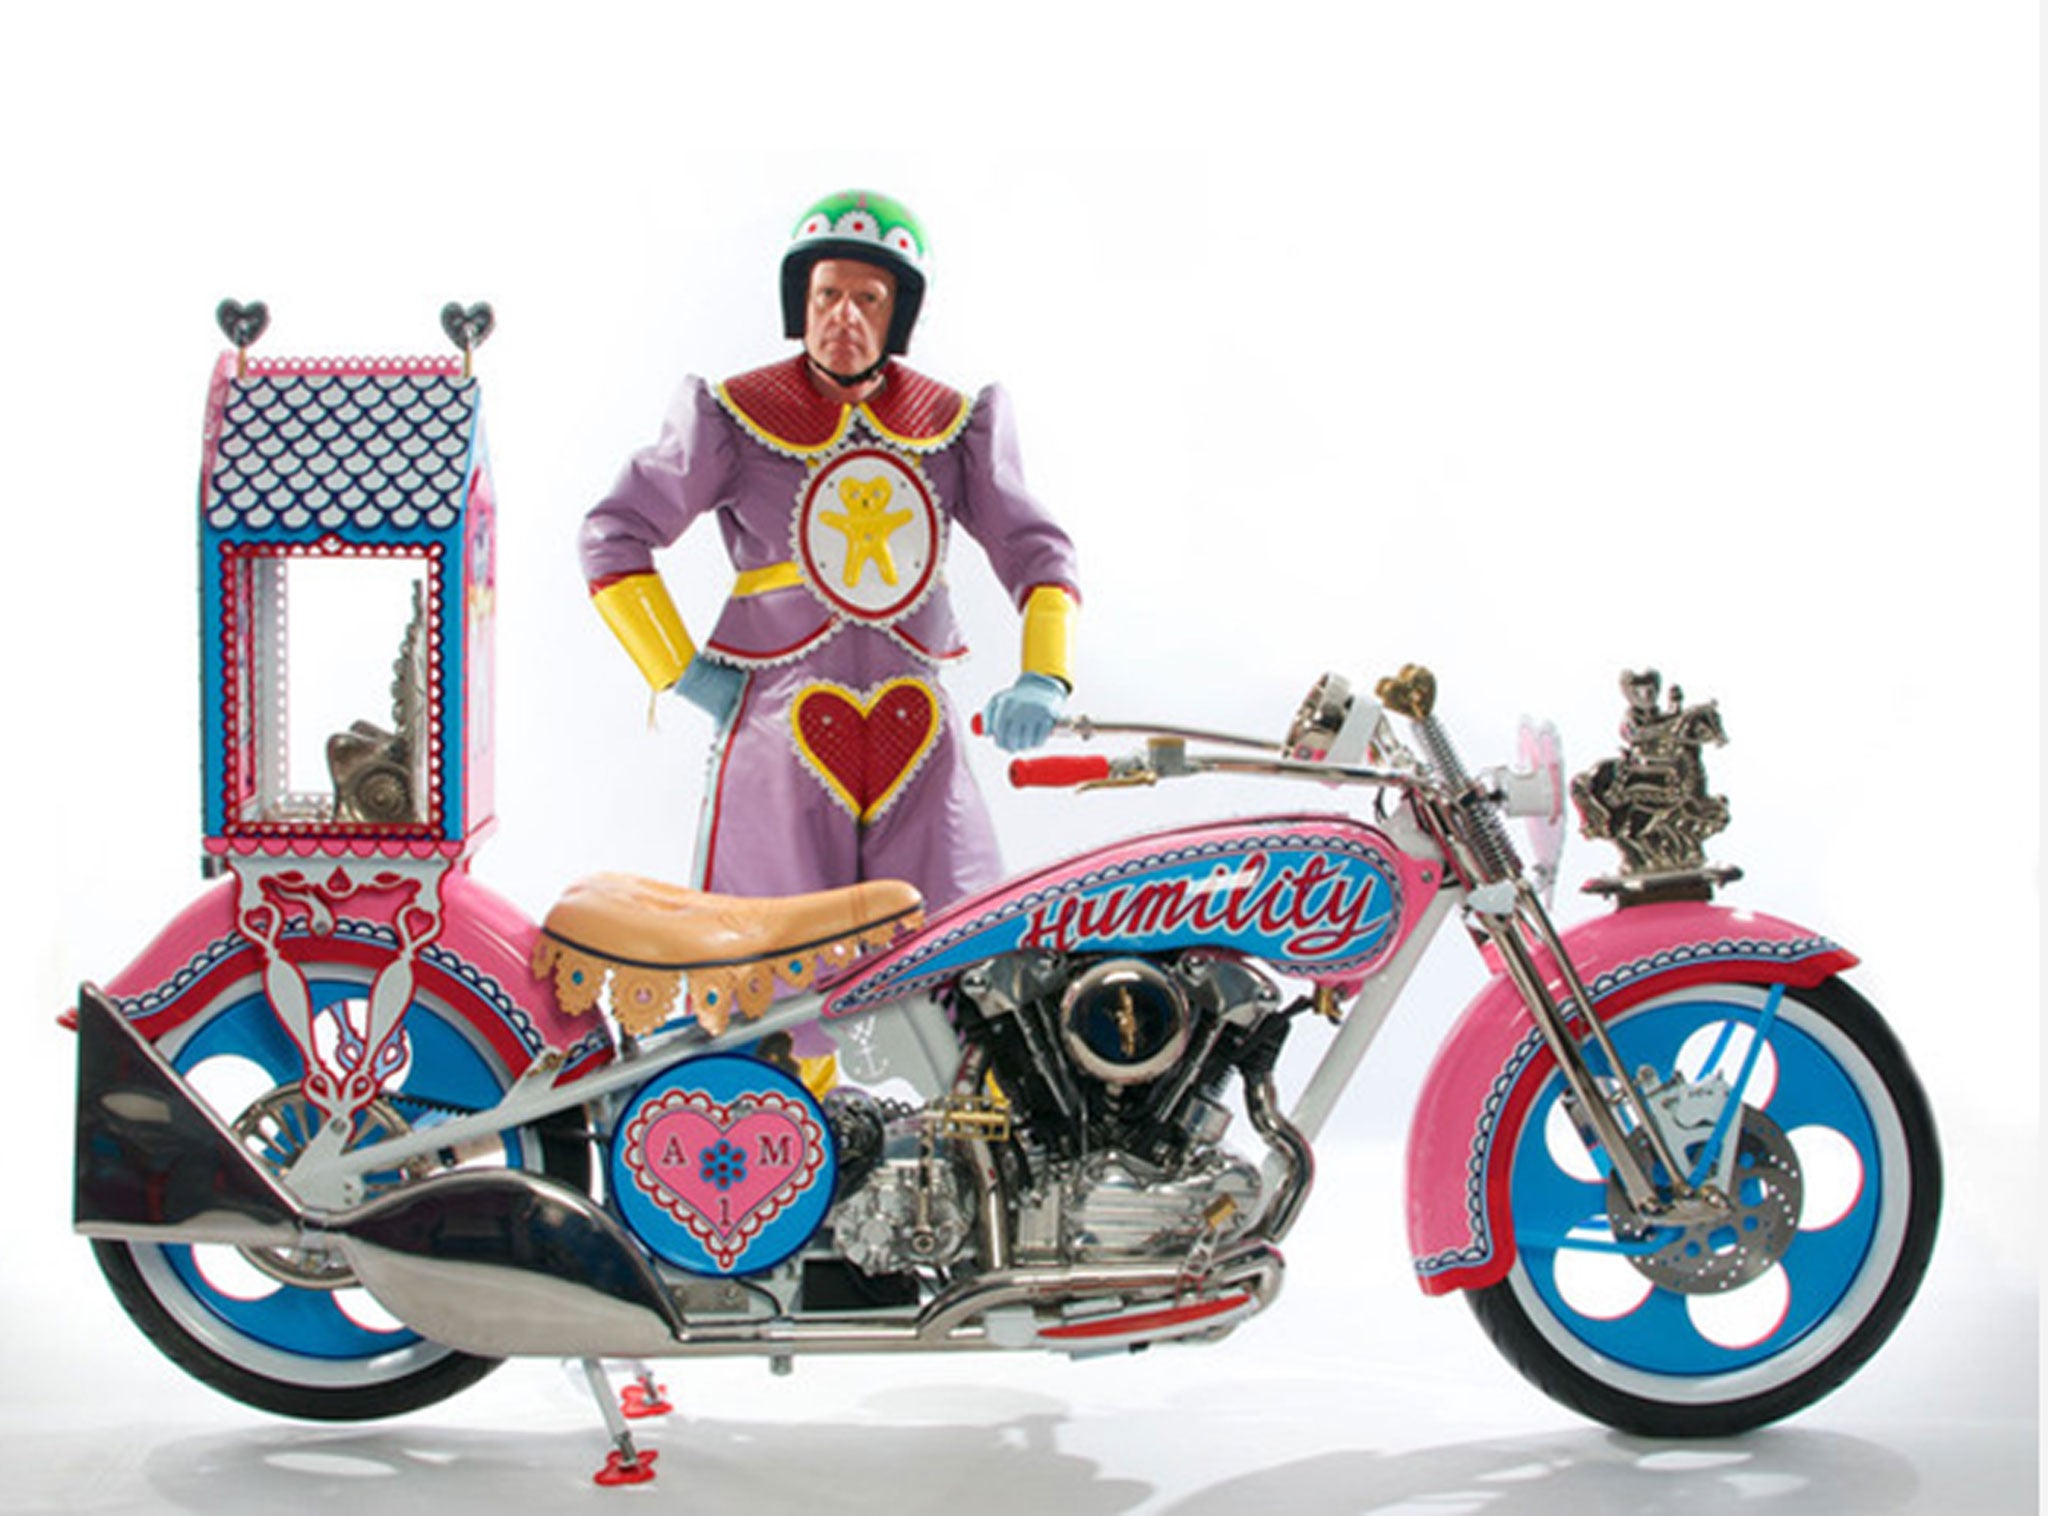 Insightful: Turner Prize-winning artist Grayson Perry will be giving a talk at the Being a Man festival